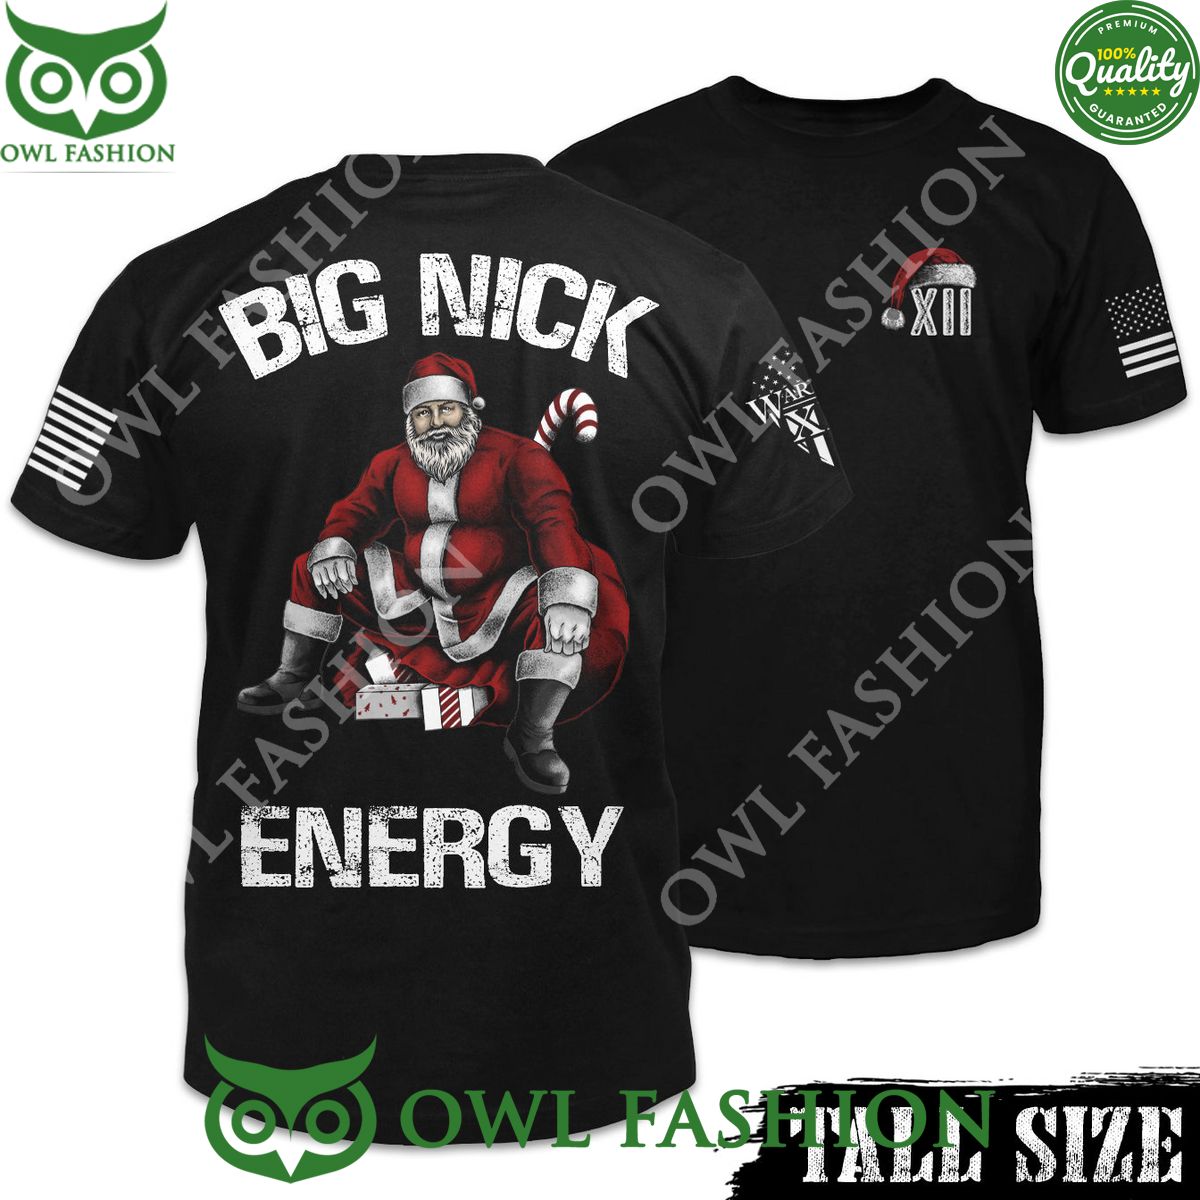 BIG NICK ENERGY XII CHRISTMAS T SHIRT The lines and shapes are harmonious.